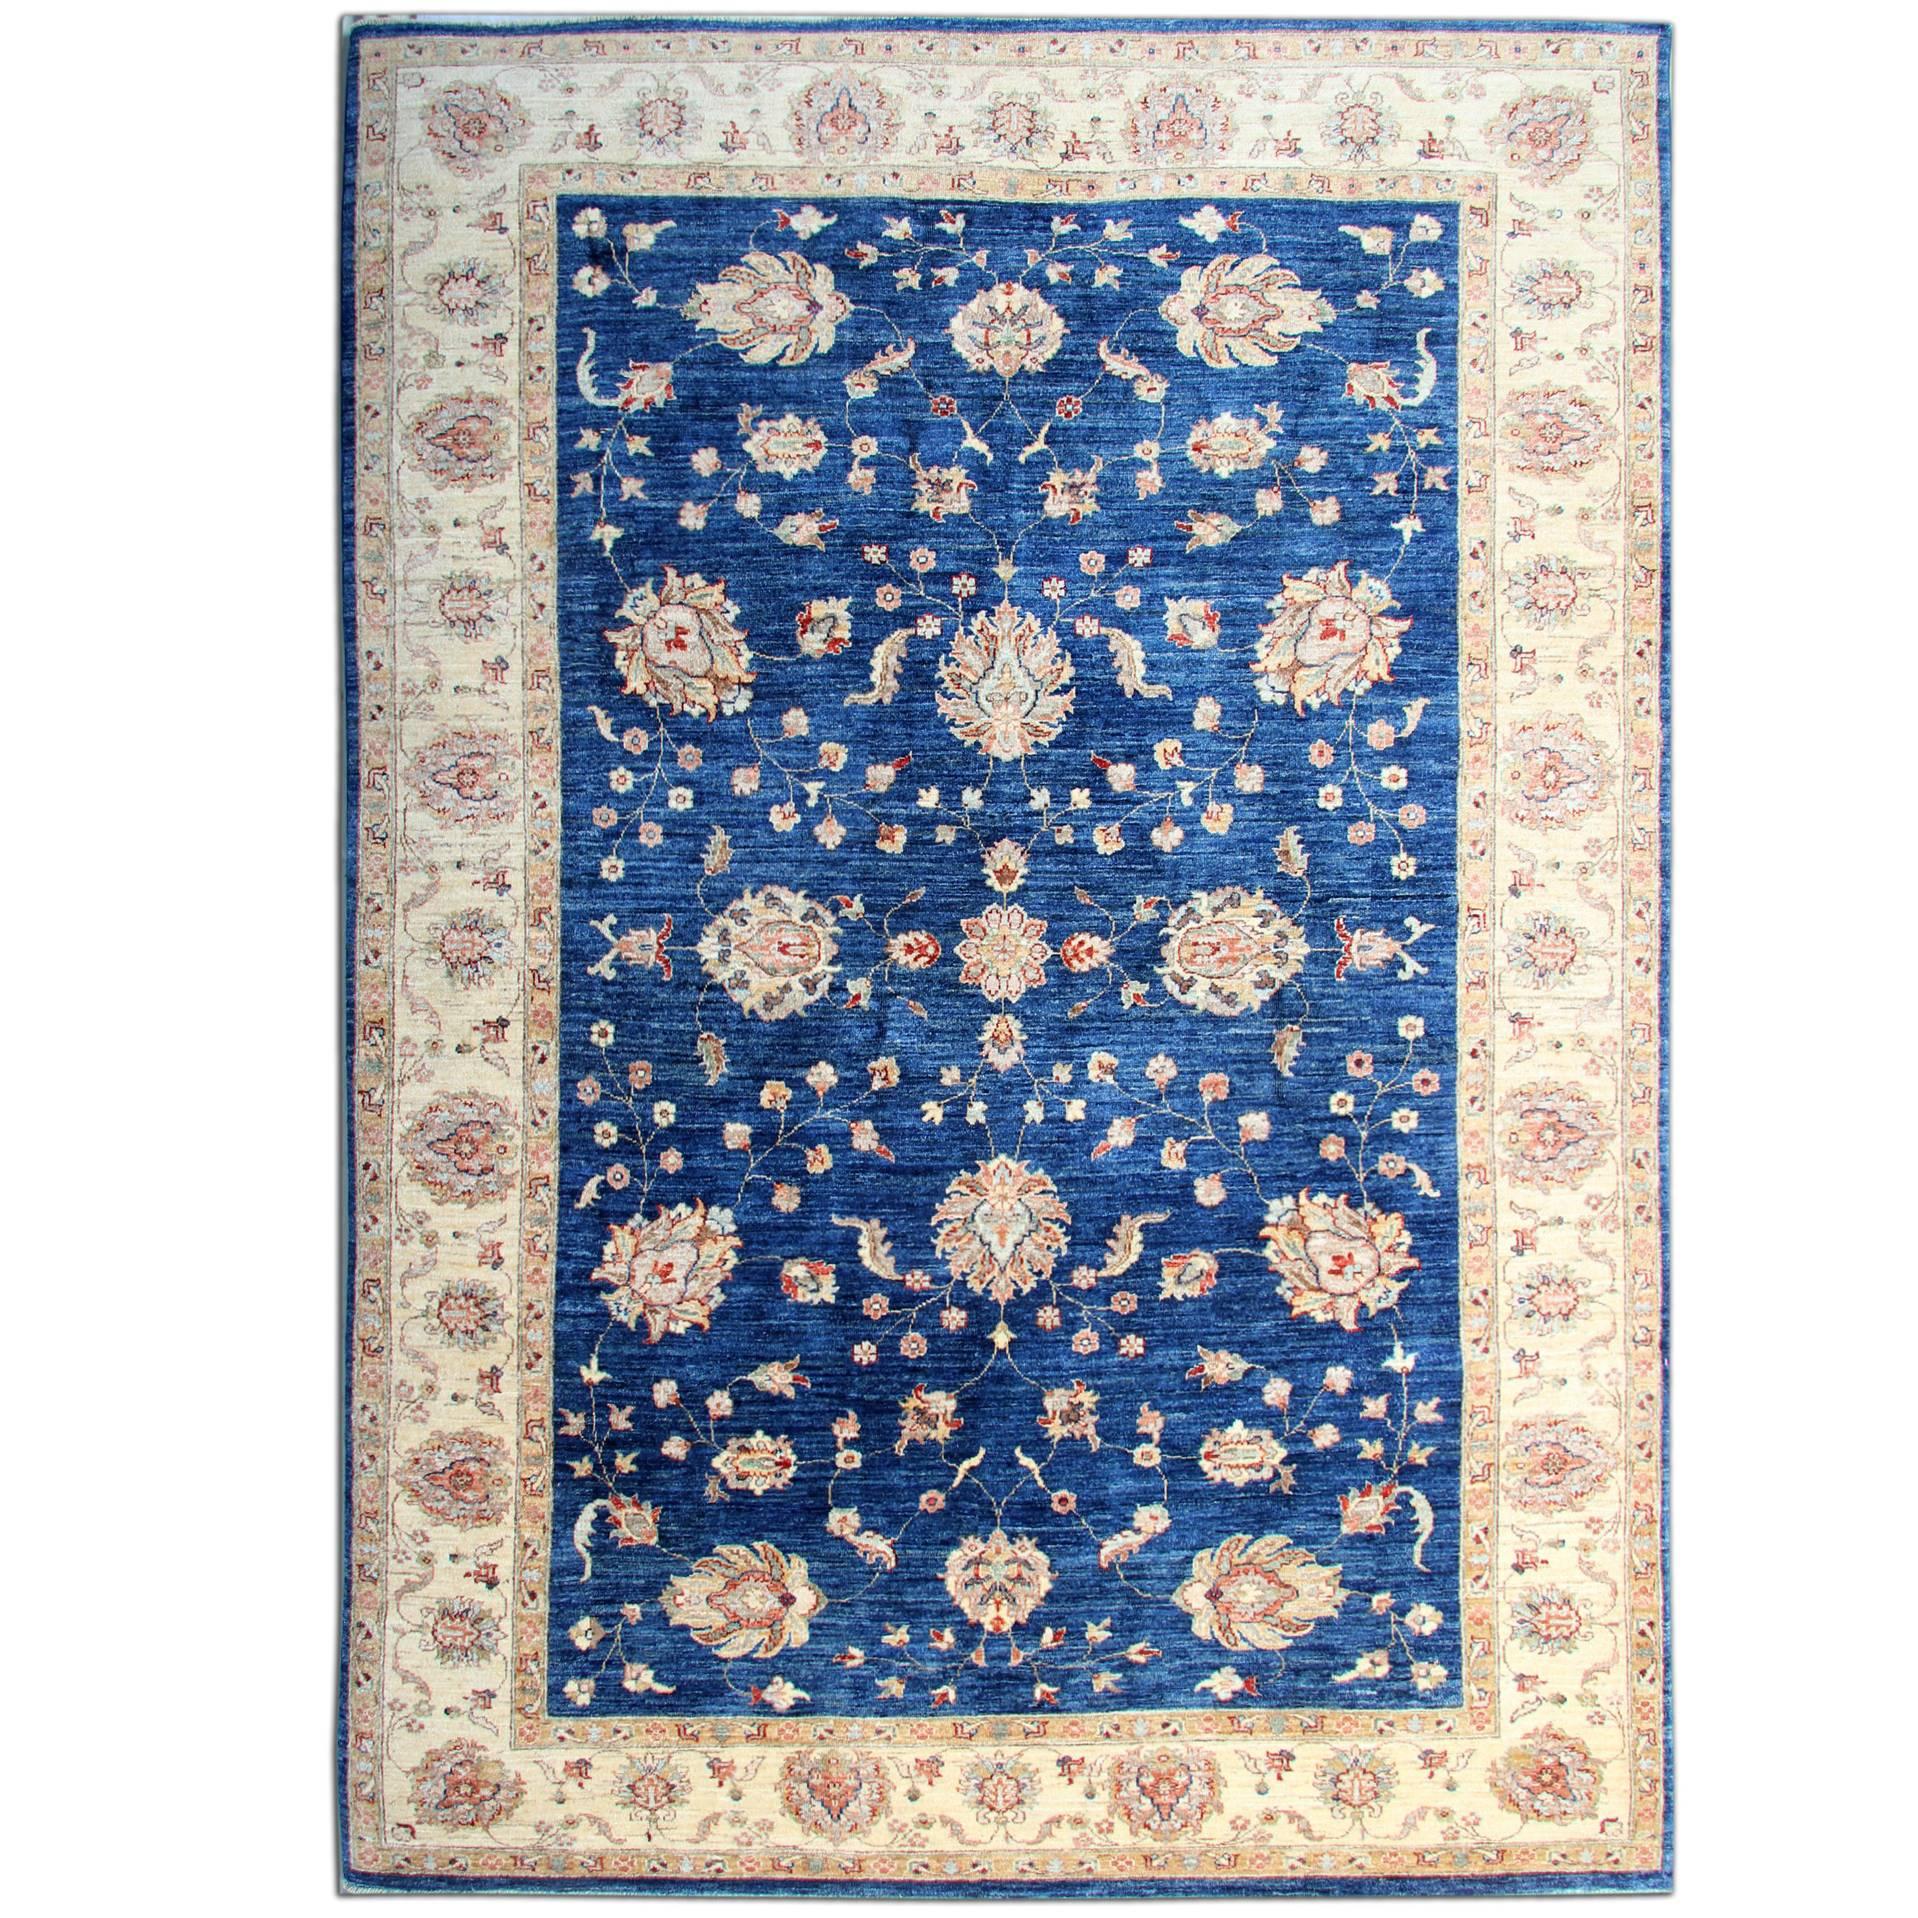 Persian Style Rugs, Sultanabad Carpet